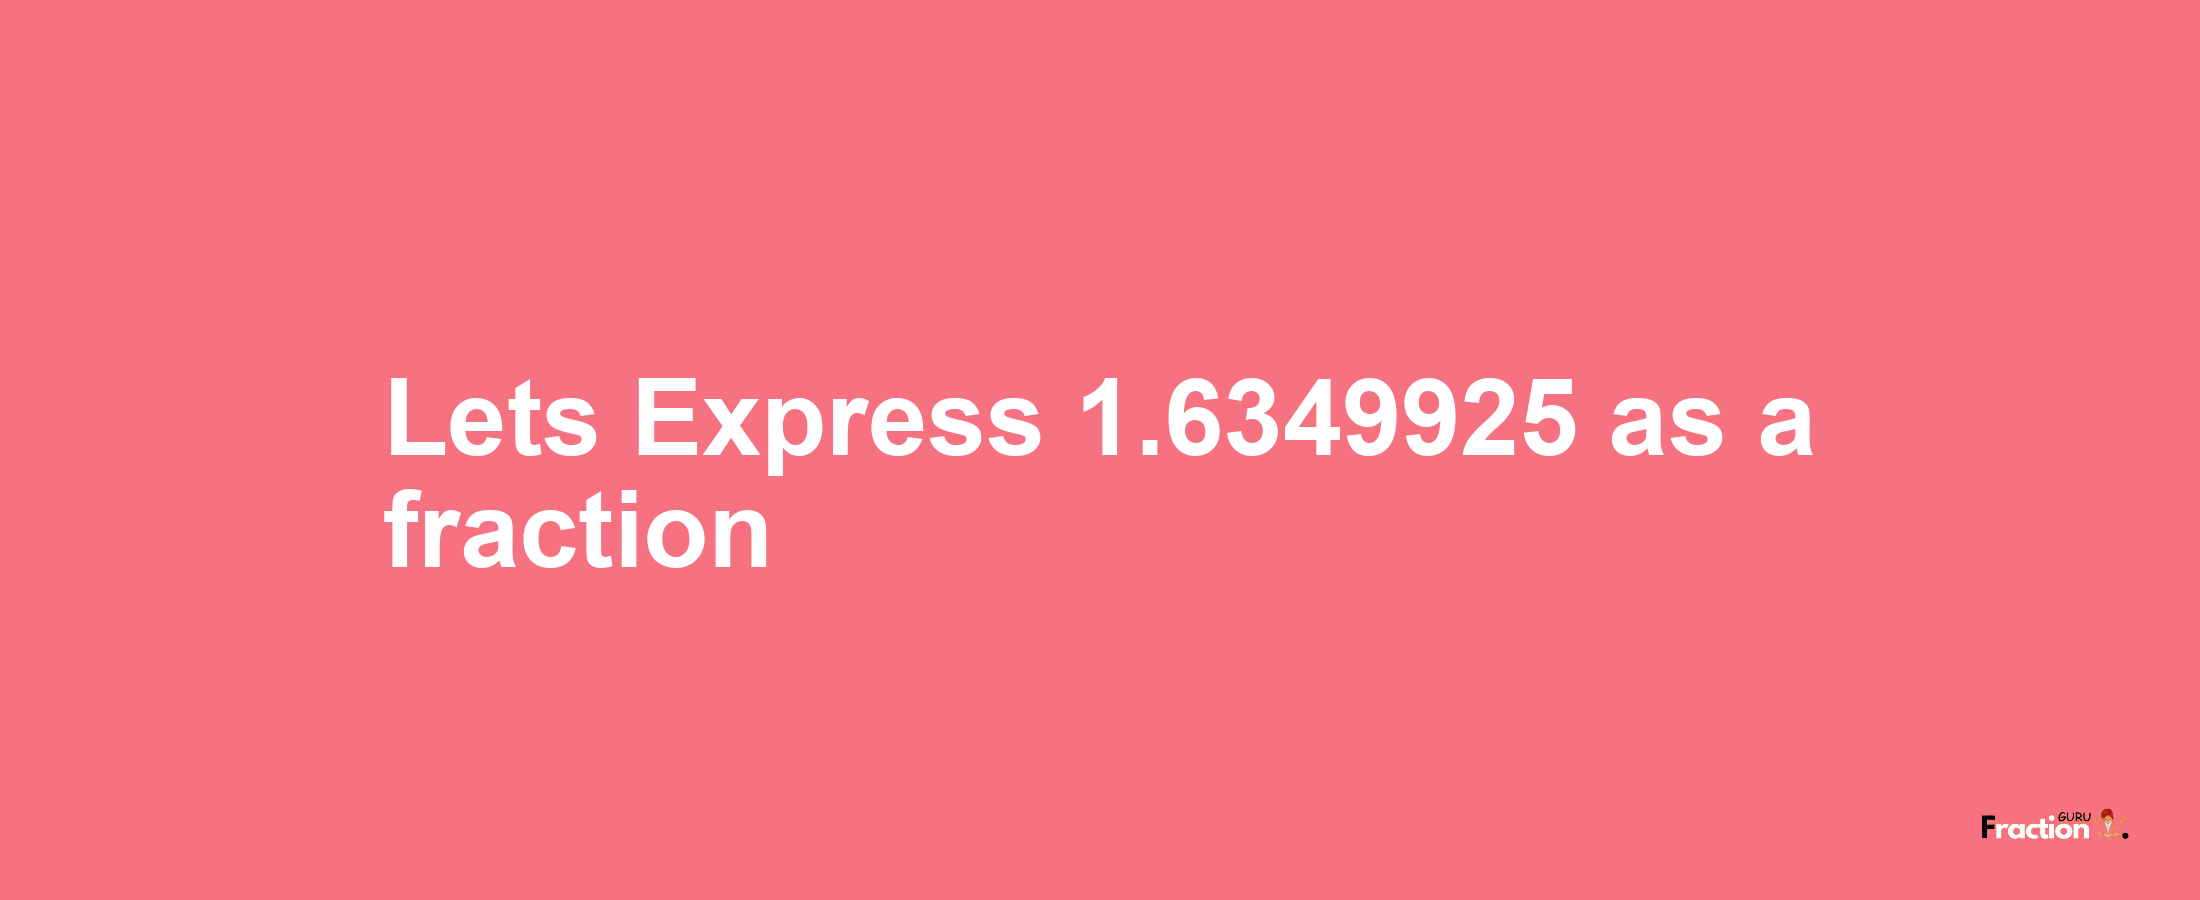 Lets Express 1.6349925 as afraction